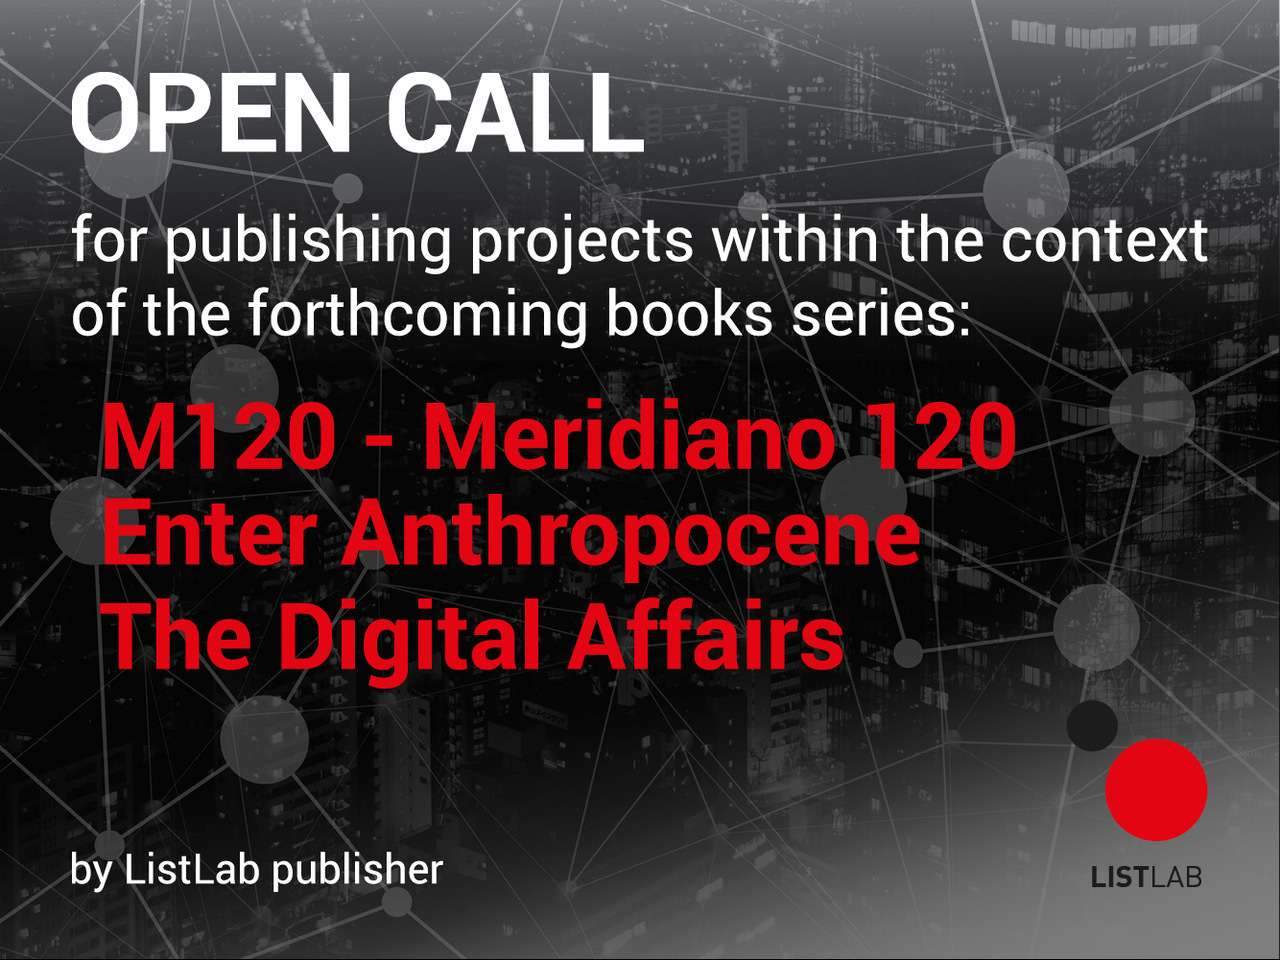 A new ListLab!  Open Call for publishing projects within the context of the forthcoming books series’ M120 – Meridiano 120,’ ‘Enter Anthropocene,’ and ‘The Digital Affairs’ by ListLab publisher.